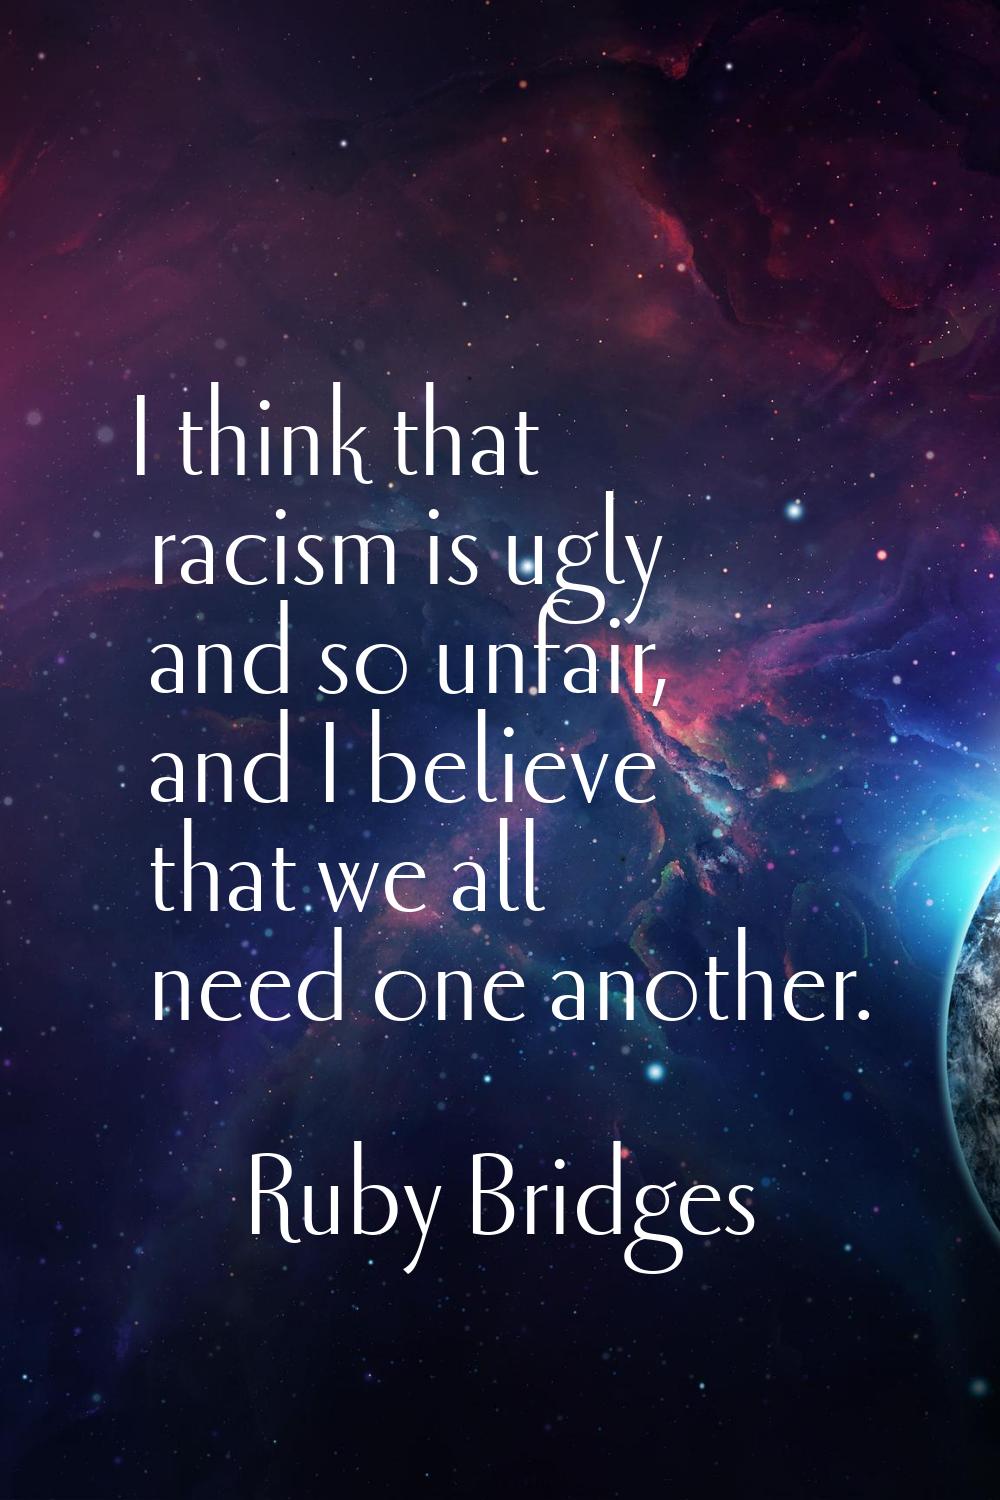 I think that racism is ugly and so unfair, and I believe that we all need one another.